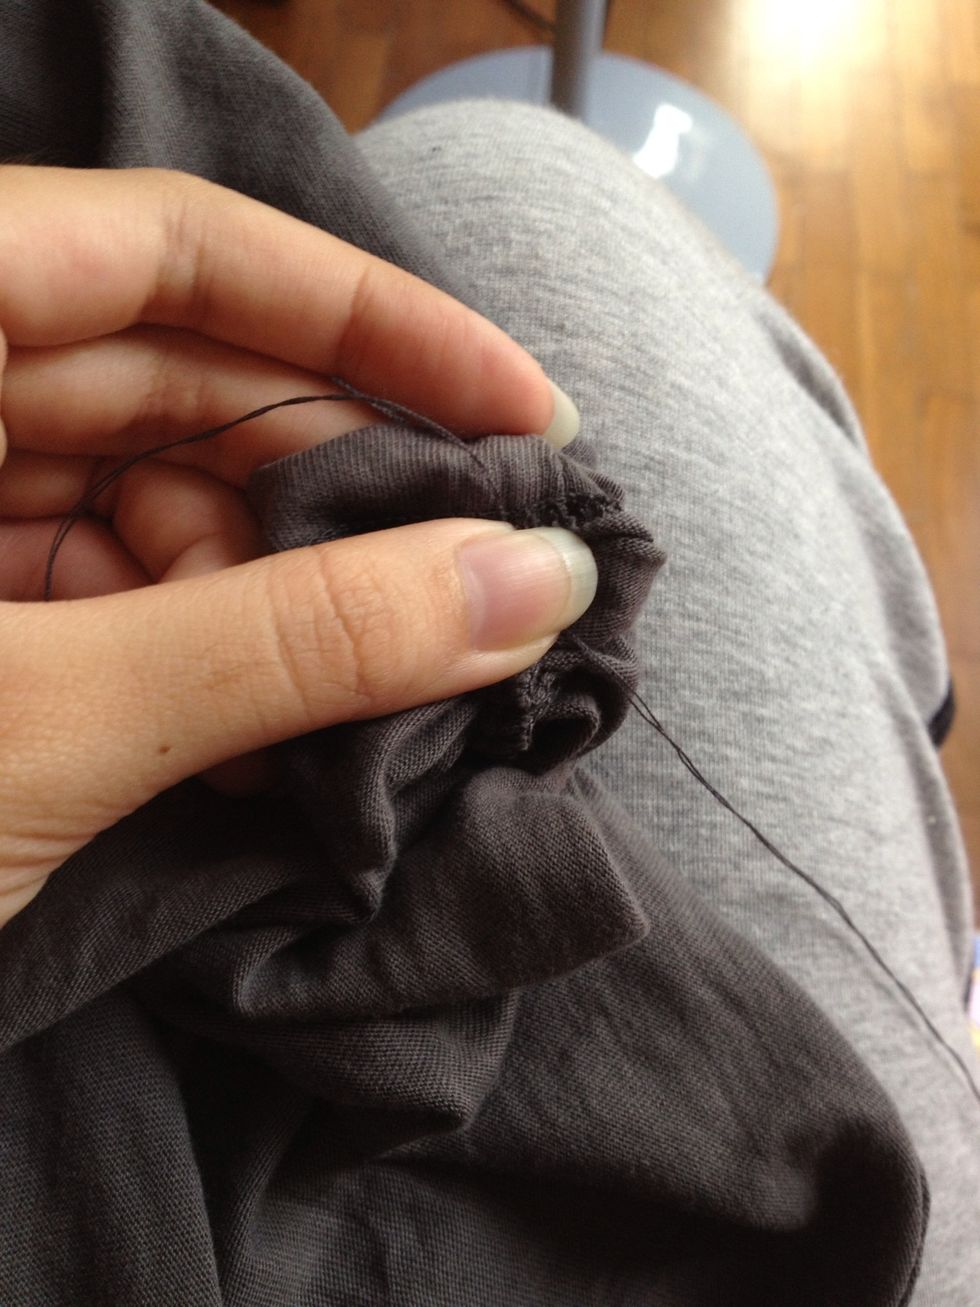 If satisfied with the scrunches, secure a knot at the end of your stitches.